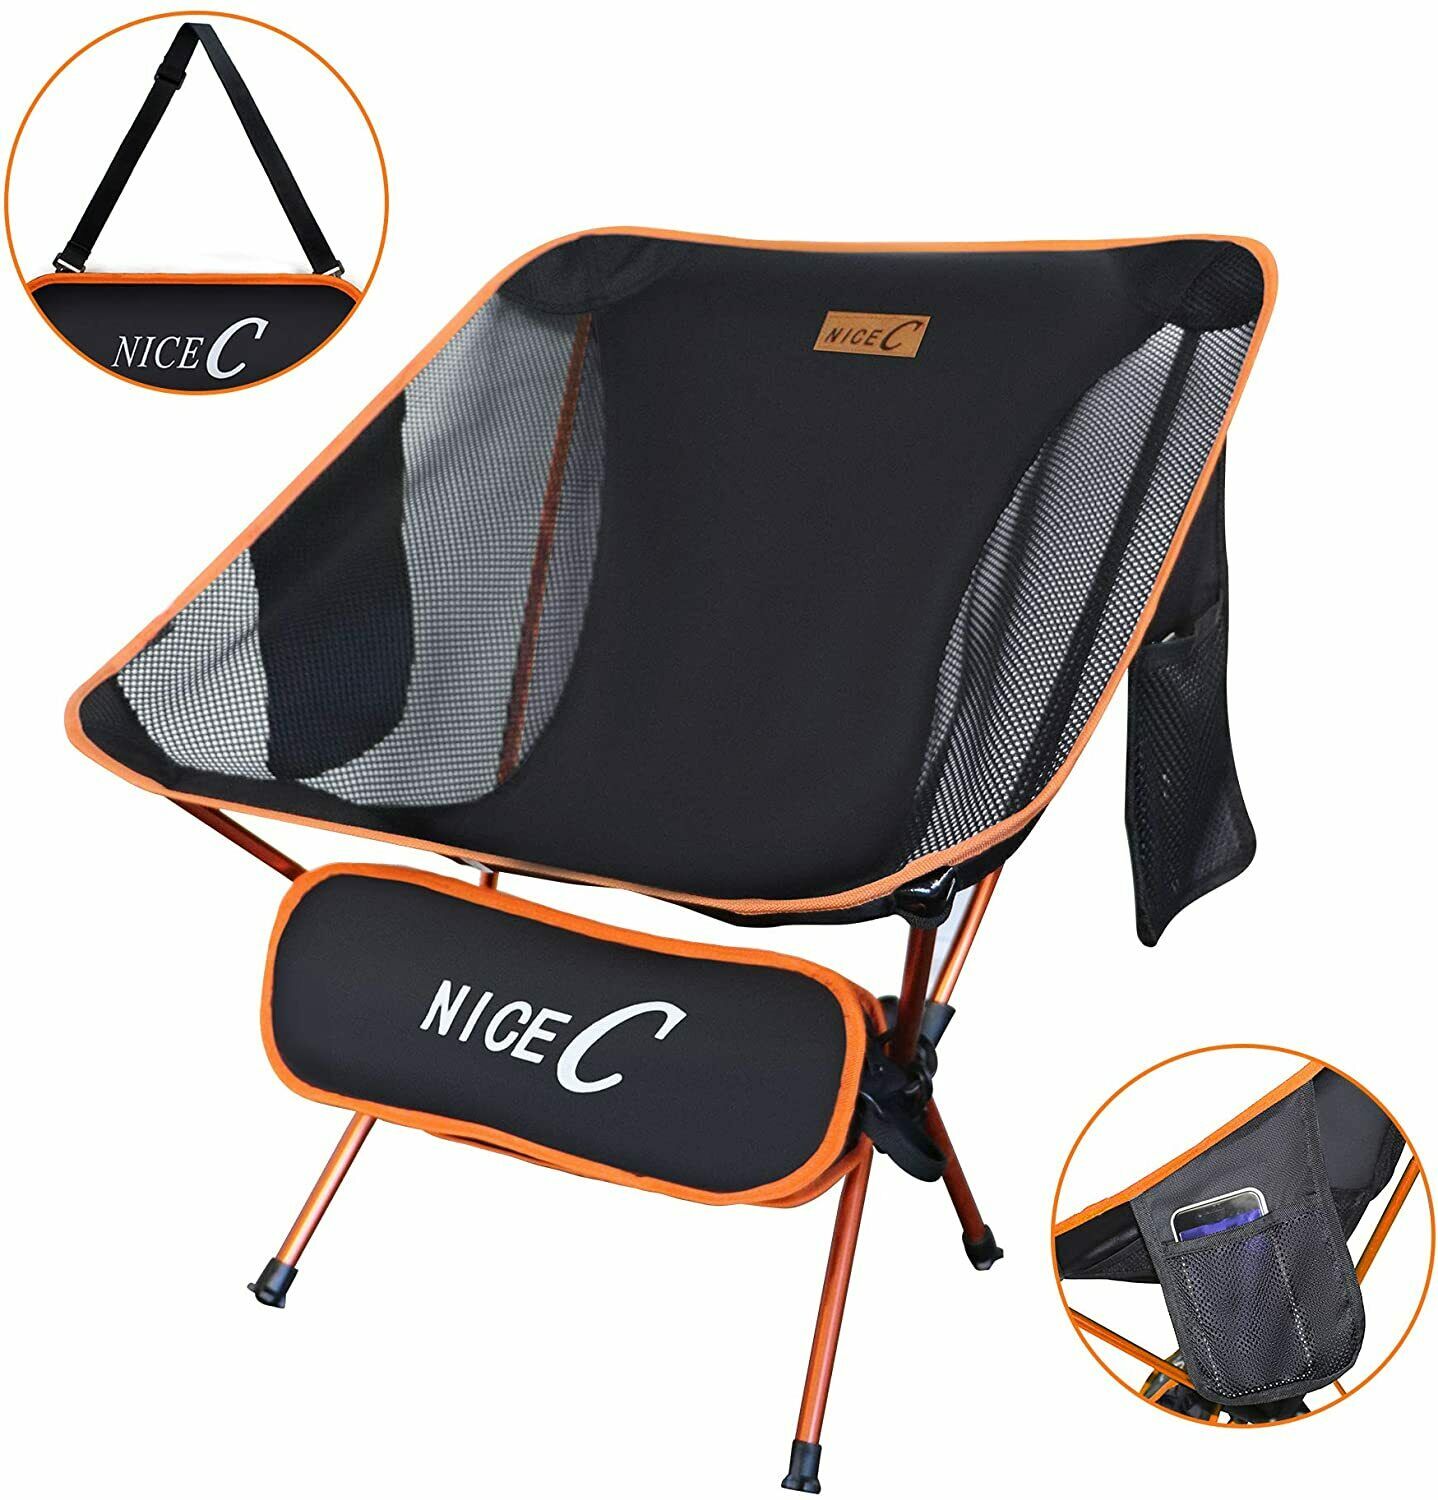 Nicec Ultralight Portable Folding Backpacking Camping Chair With 2 Storage Bags